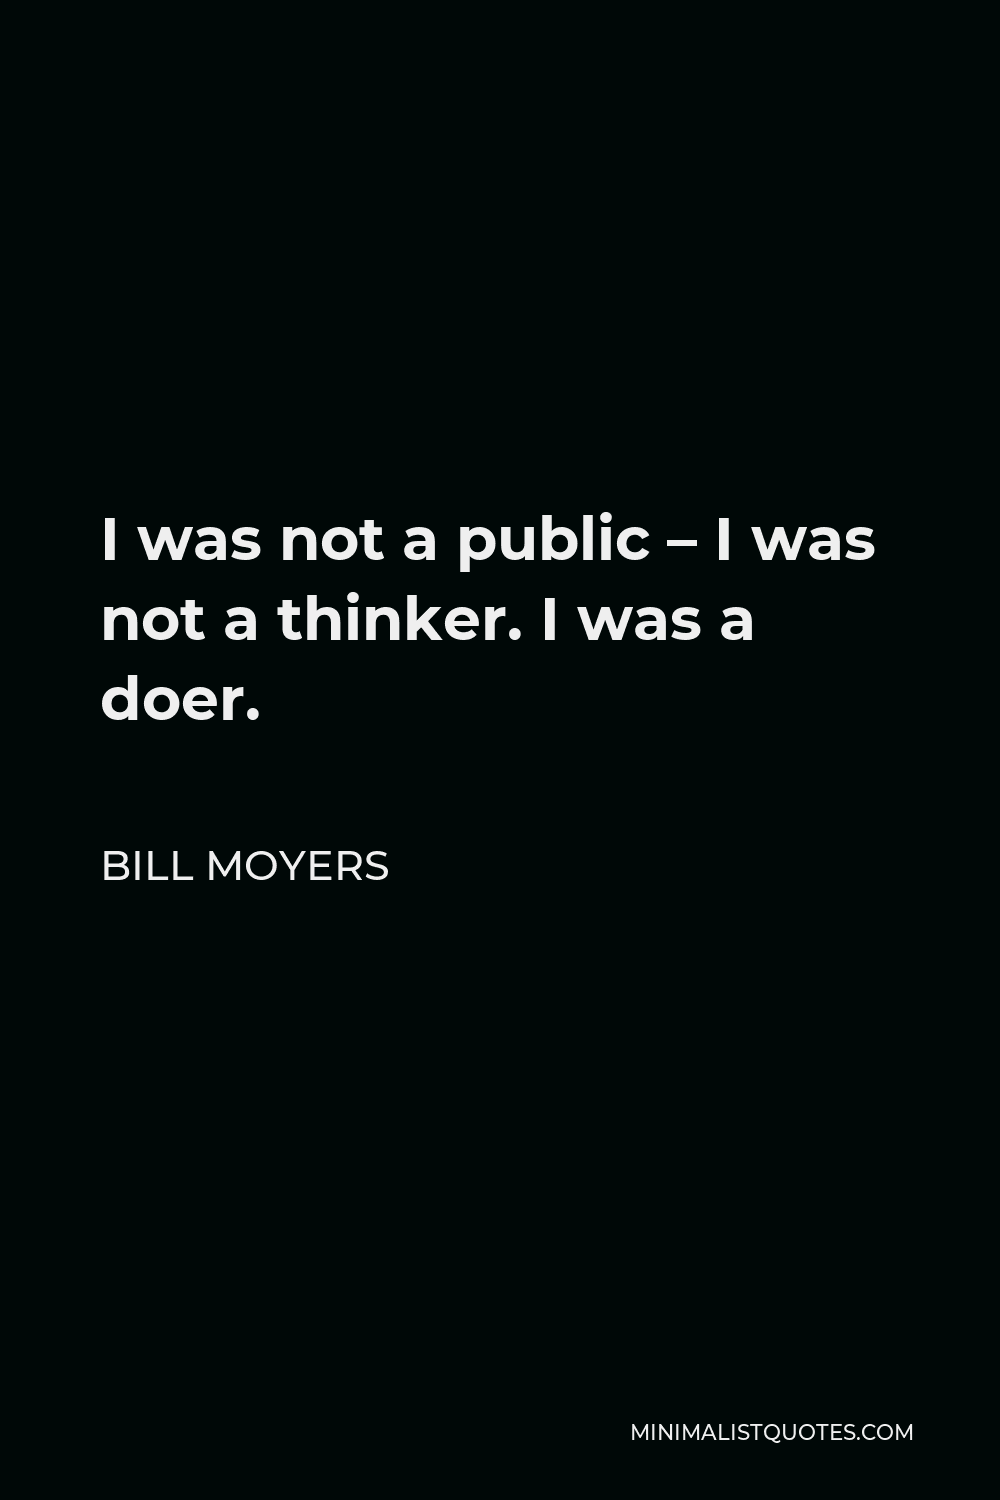 Bill Moyers Quote - I was not a public – I was not a thinker. I was a doer.